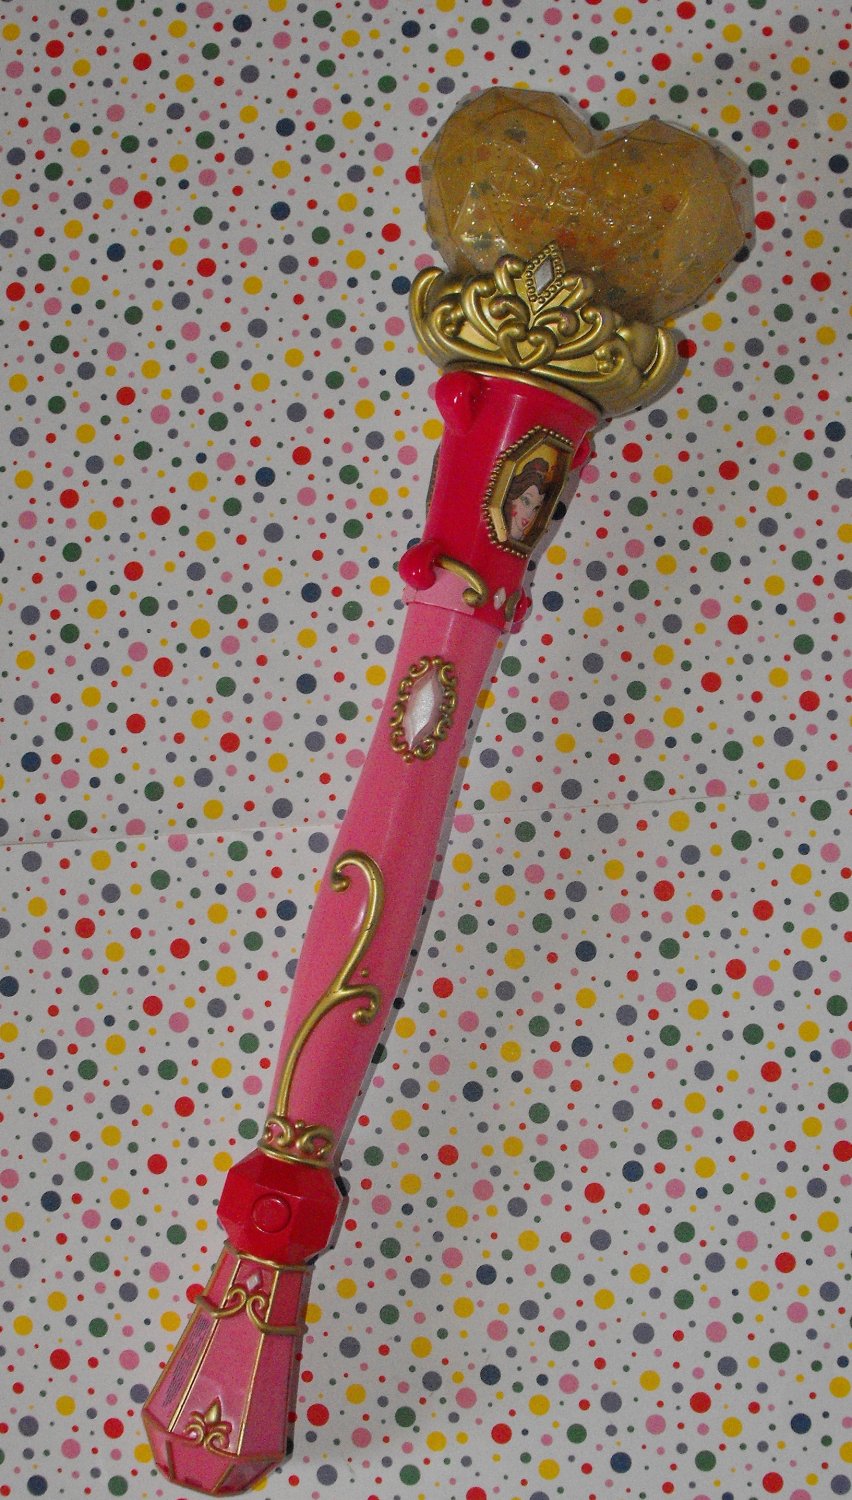 Disney Princesses Magical Light Up Wand by Spin Master